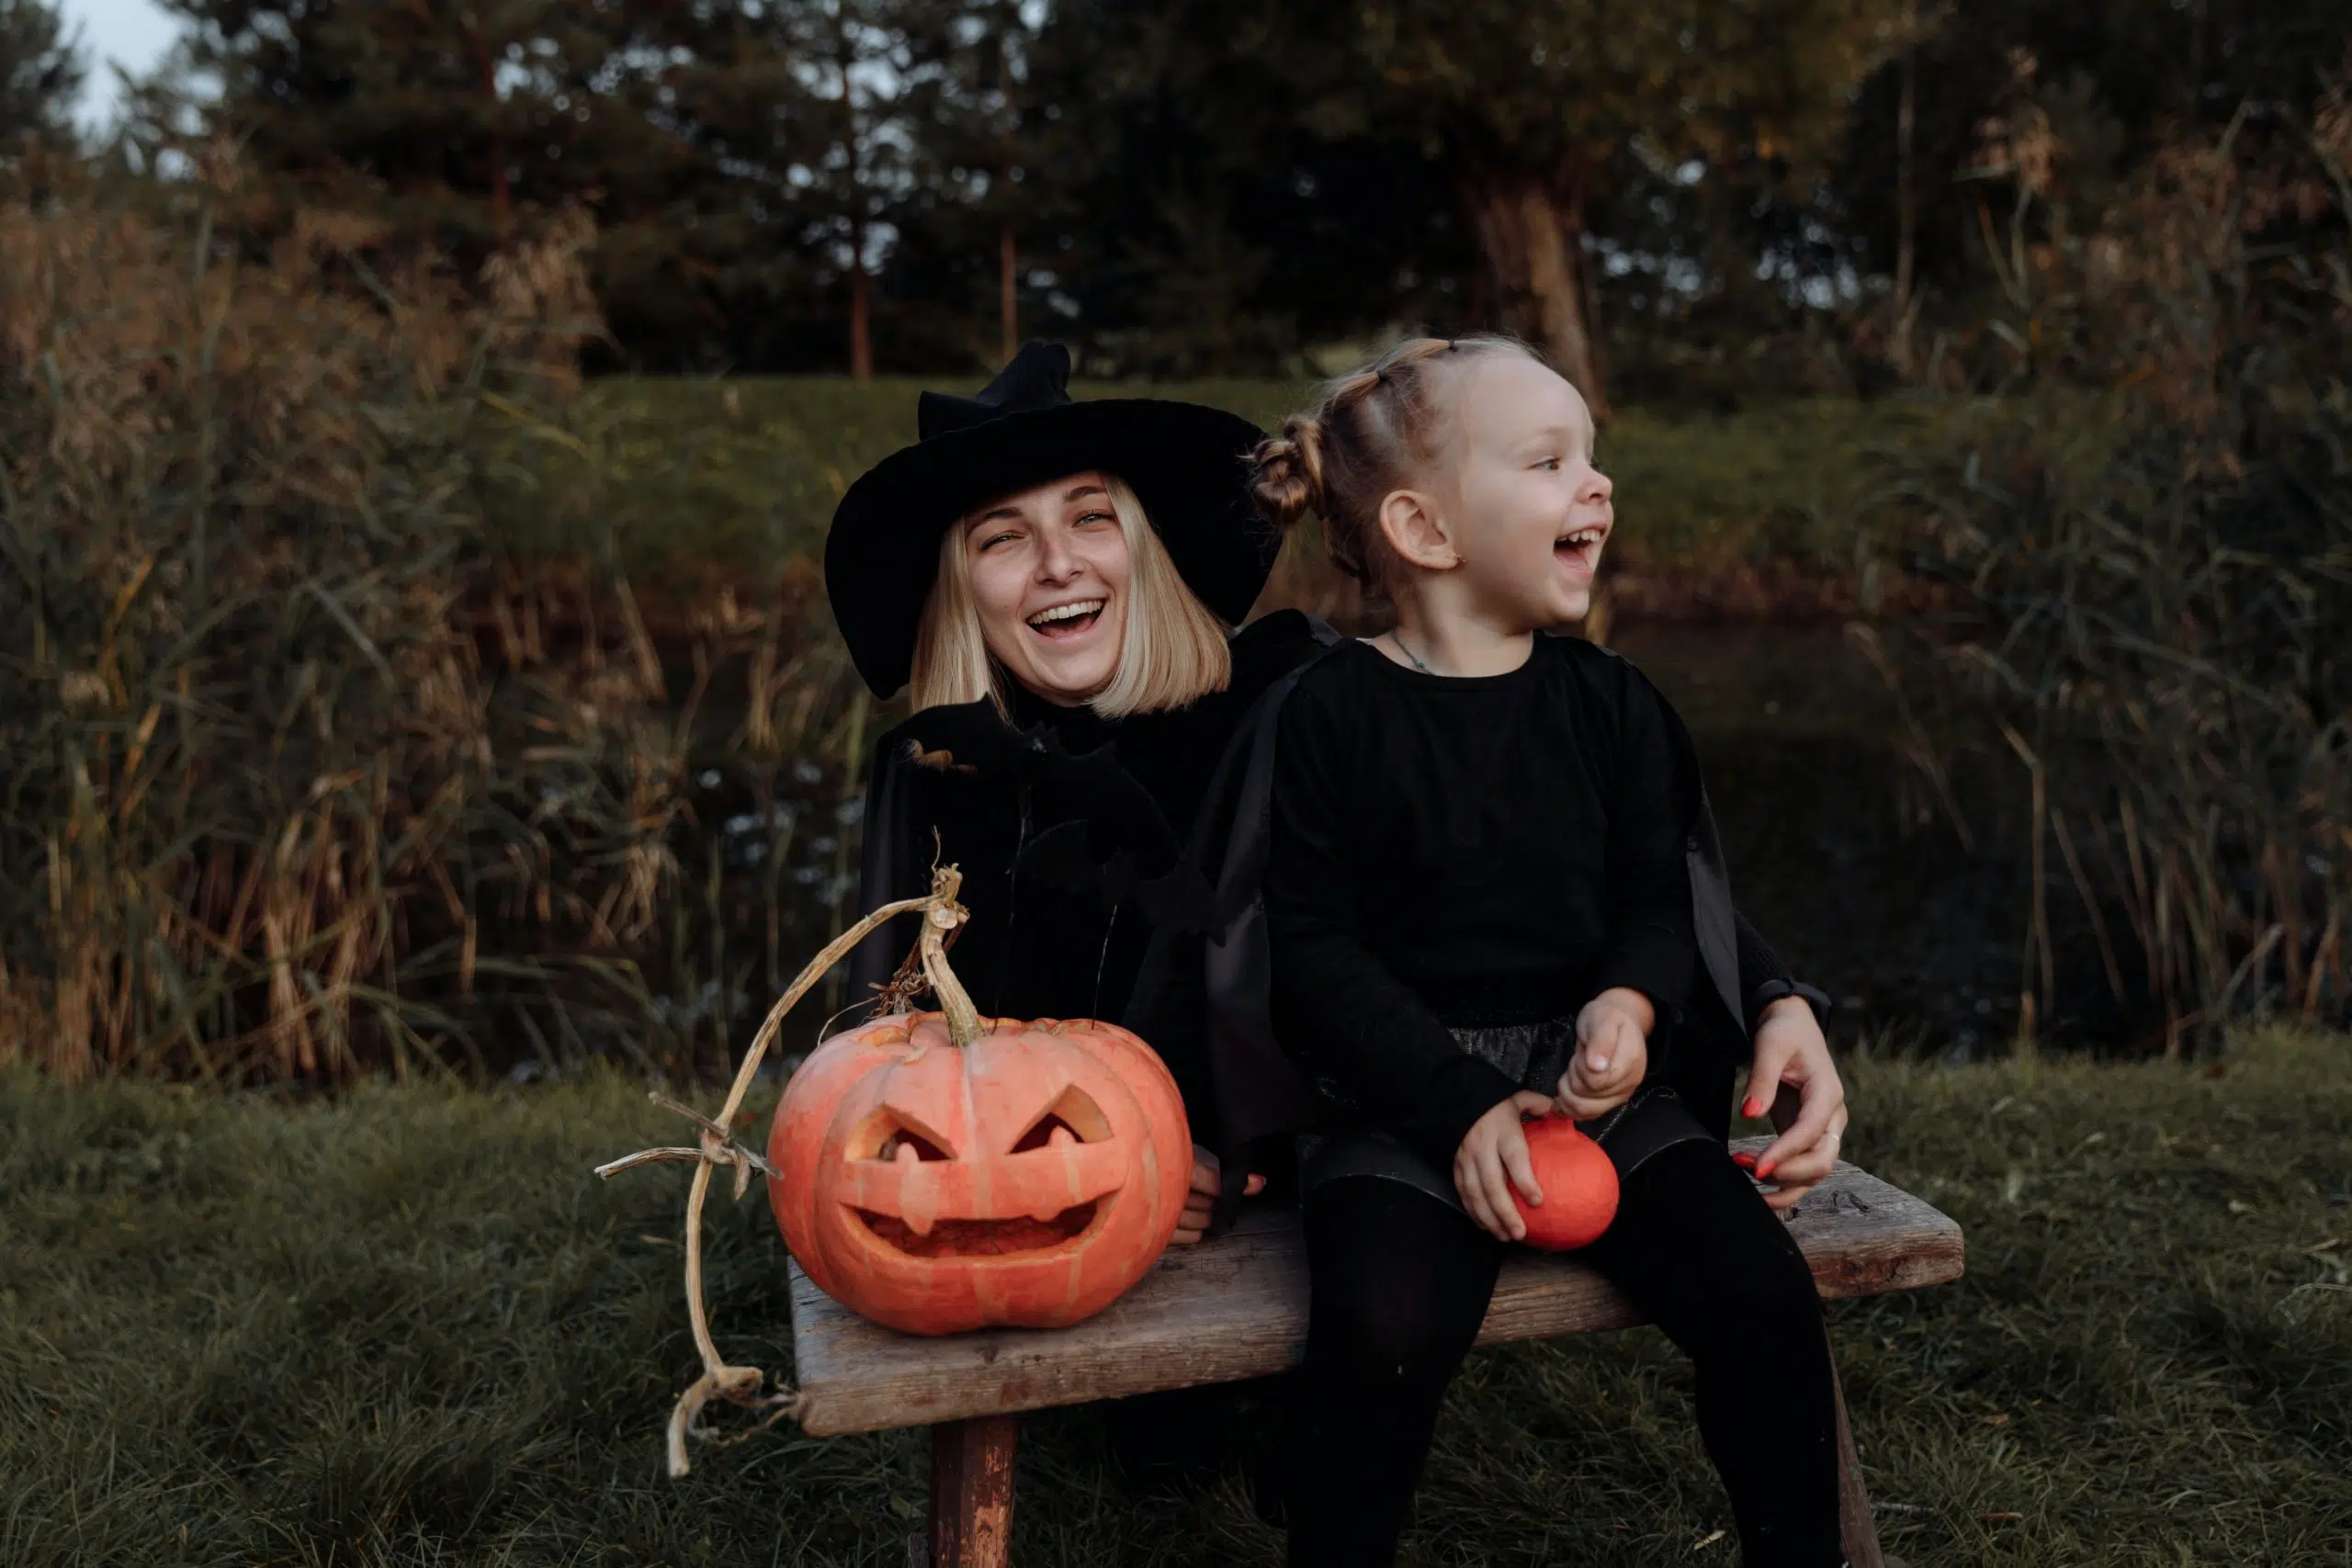 Trick-or-Treating safety tips for Halloween